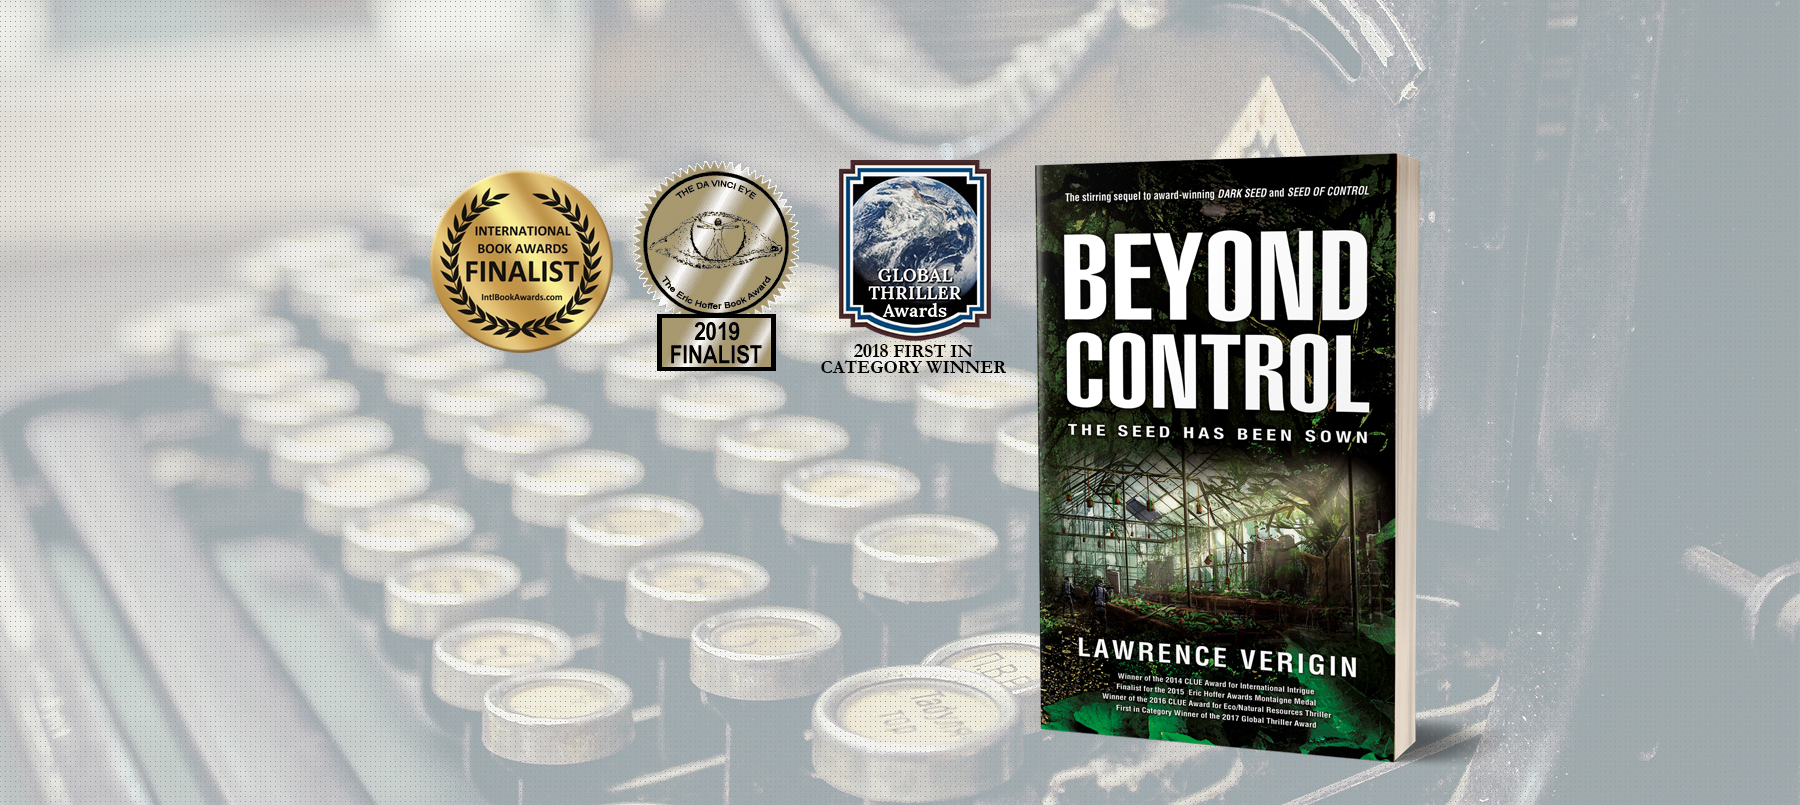 Seed of Control by Lawrence Verigin